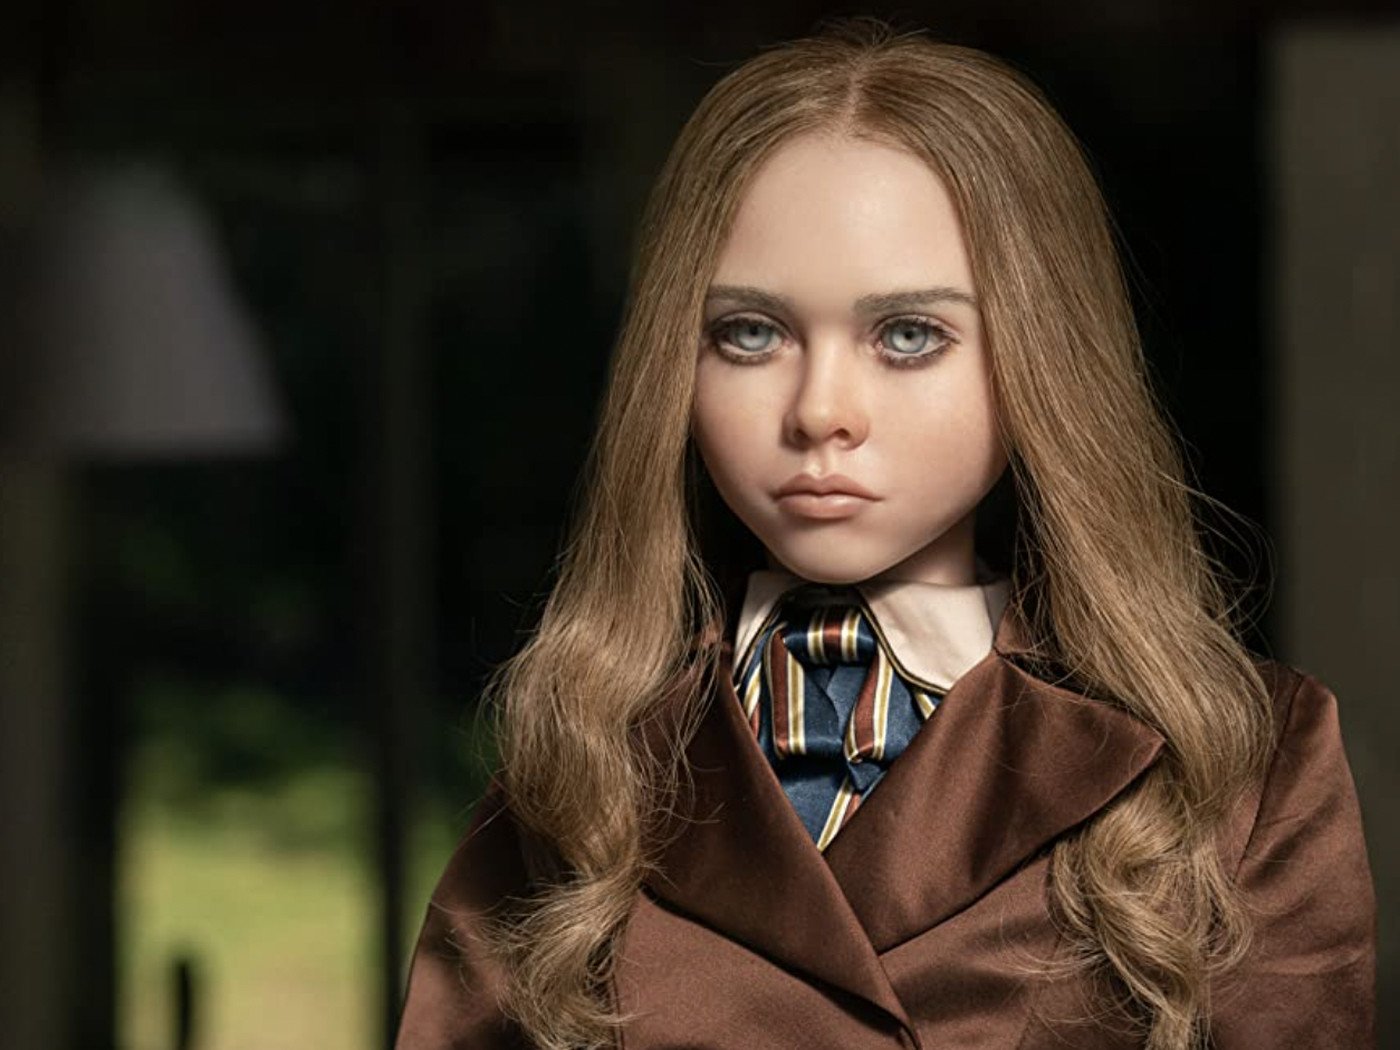 M3gan, the murder doll, is already a camp horror icon in the making